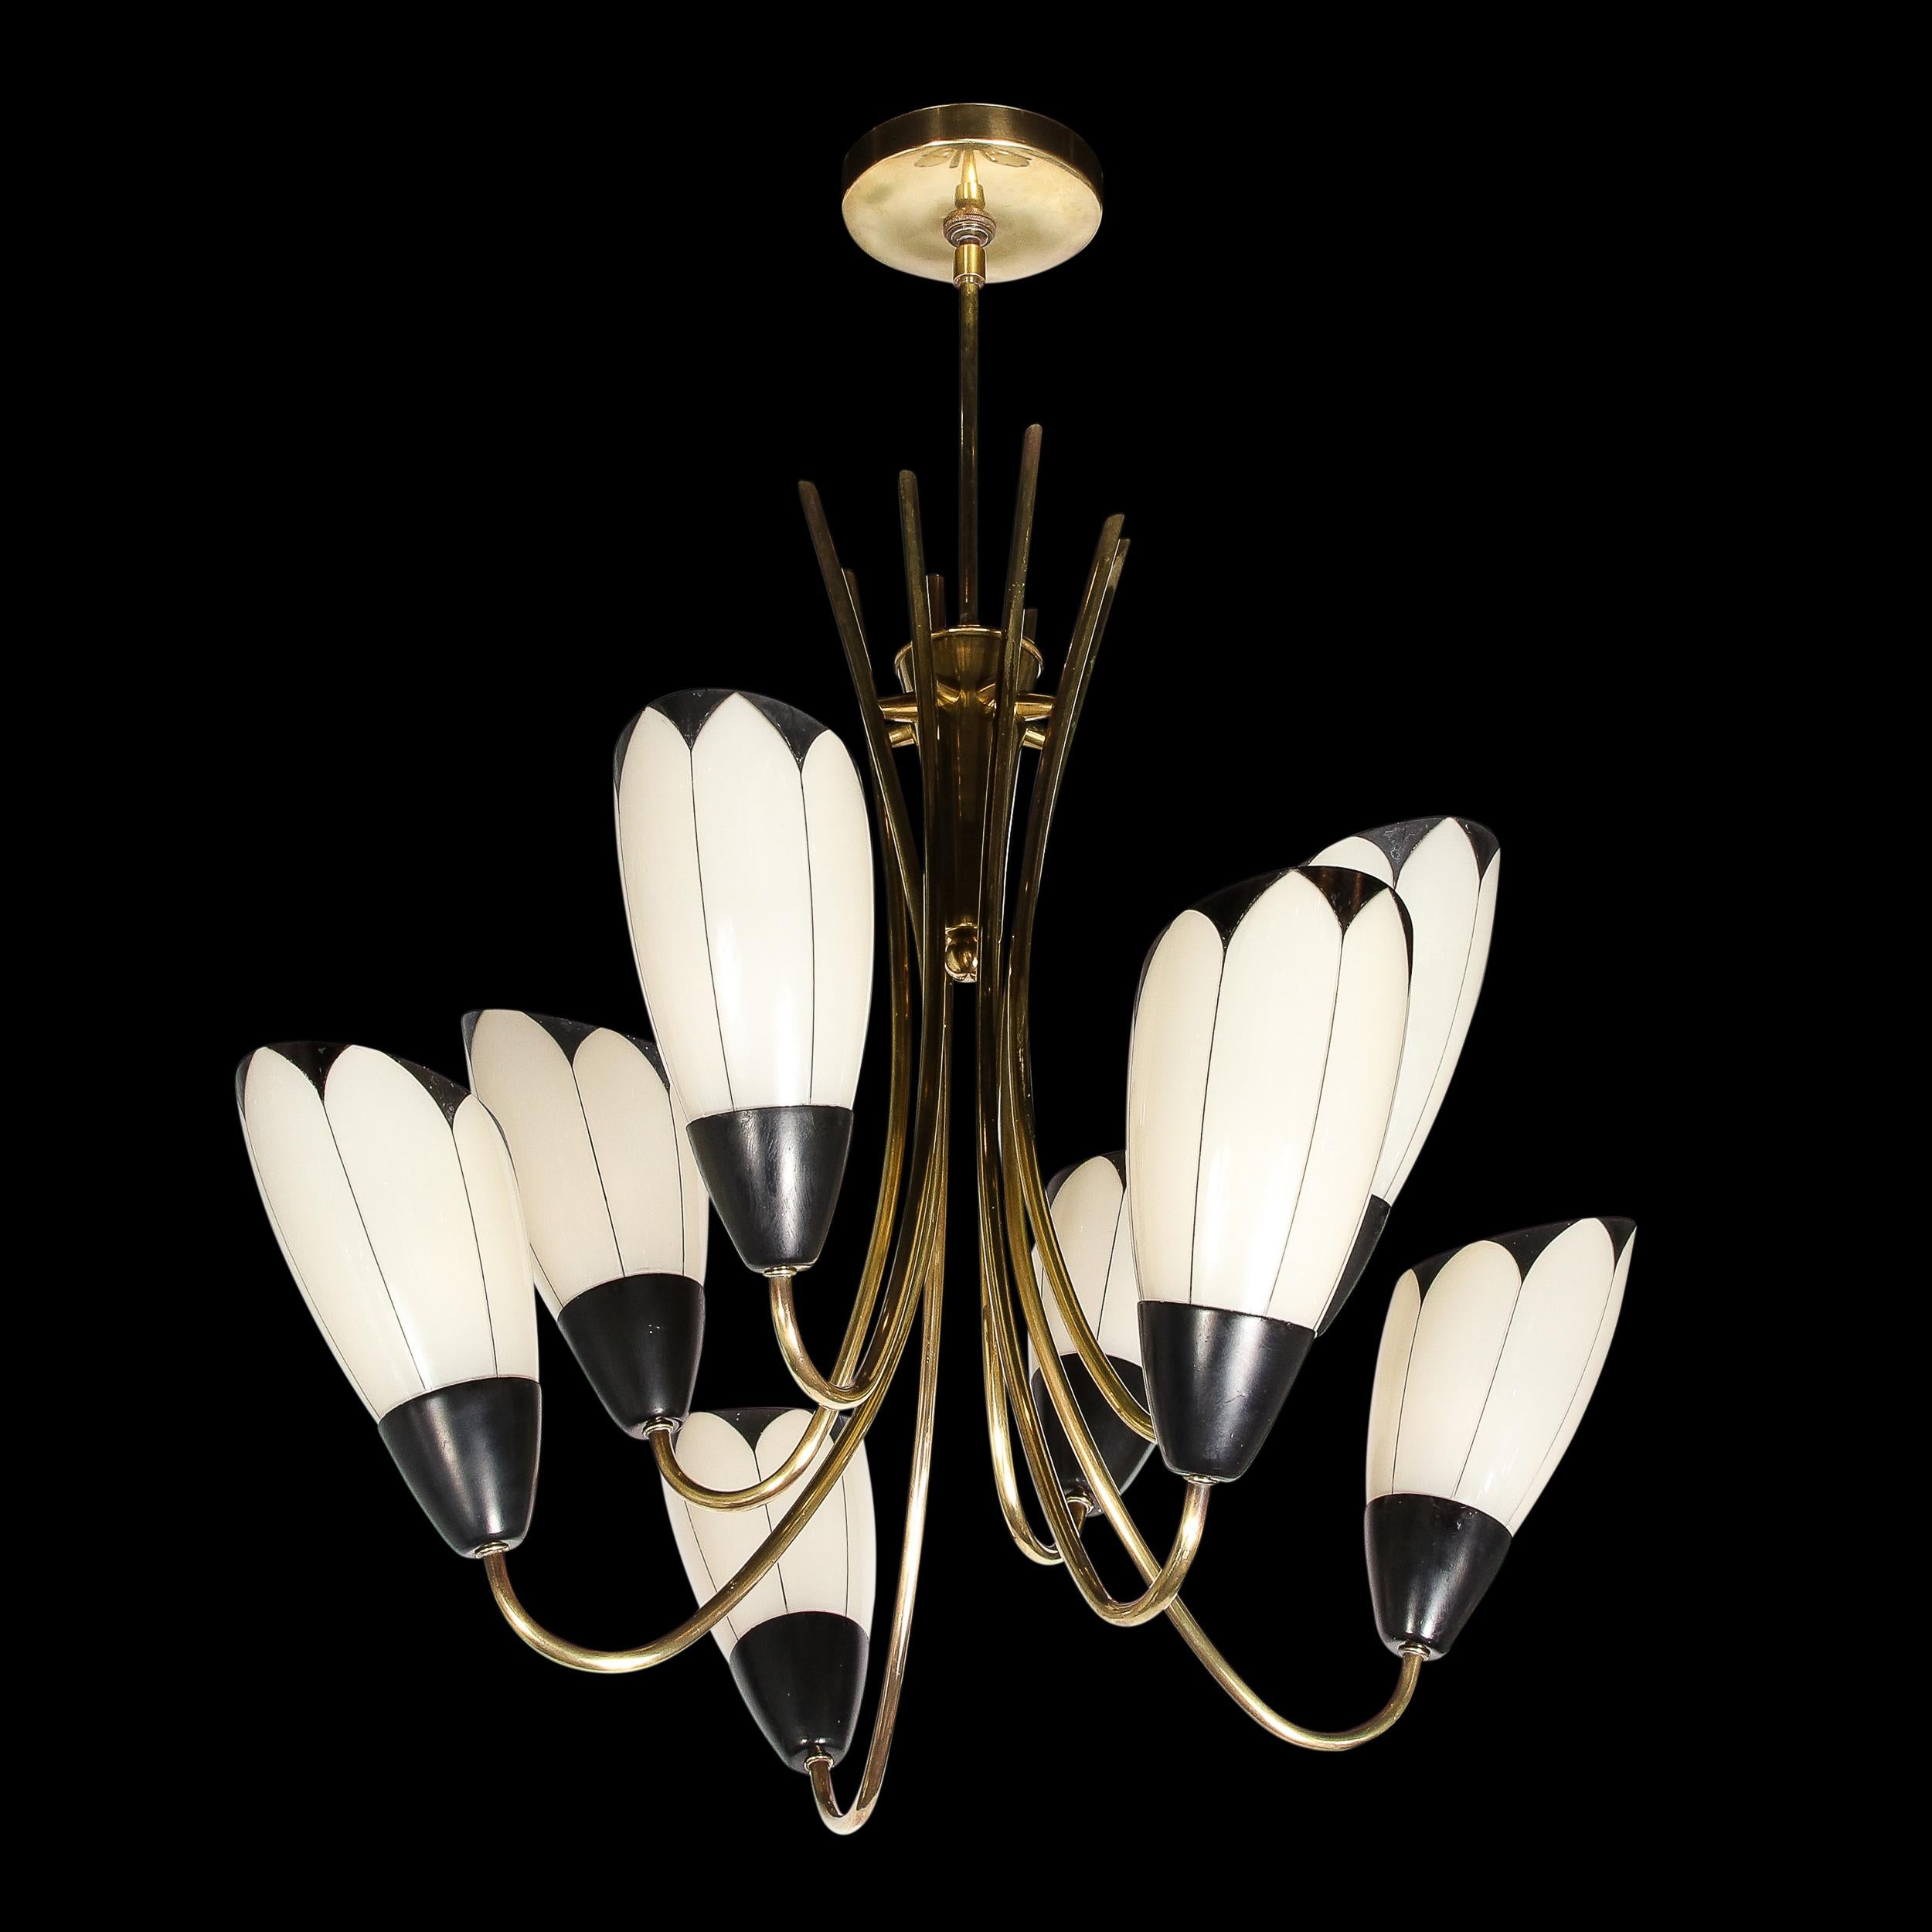 This beautiful Mid-Century Modern chandelier was realized in France circa 1950. It offers eight oblong elongated milk glass shades replete with hand embellished demilune pointed motifs in black enamel that transition into fine striations in the same